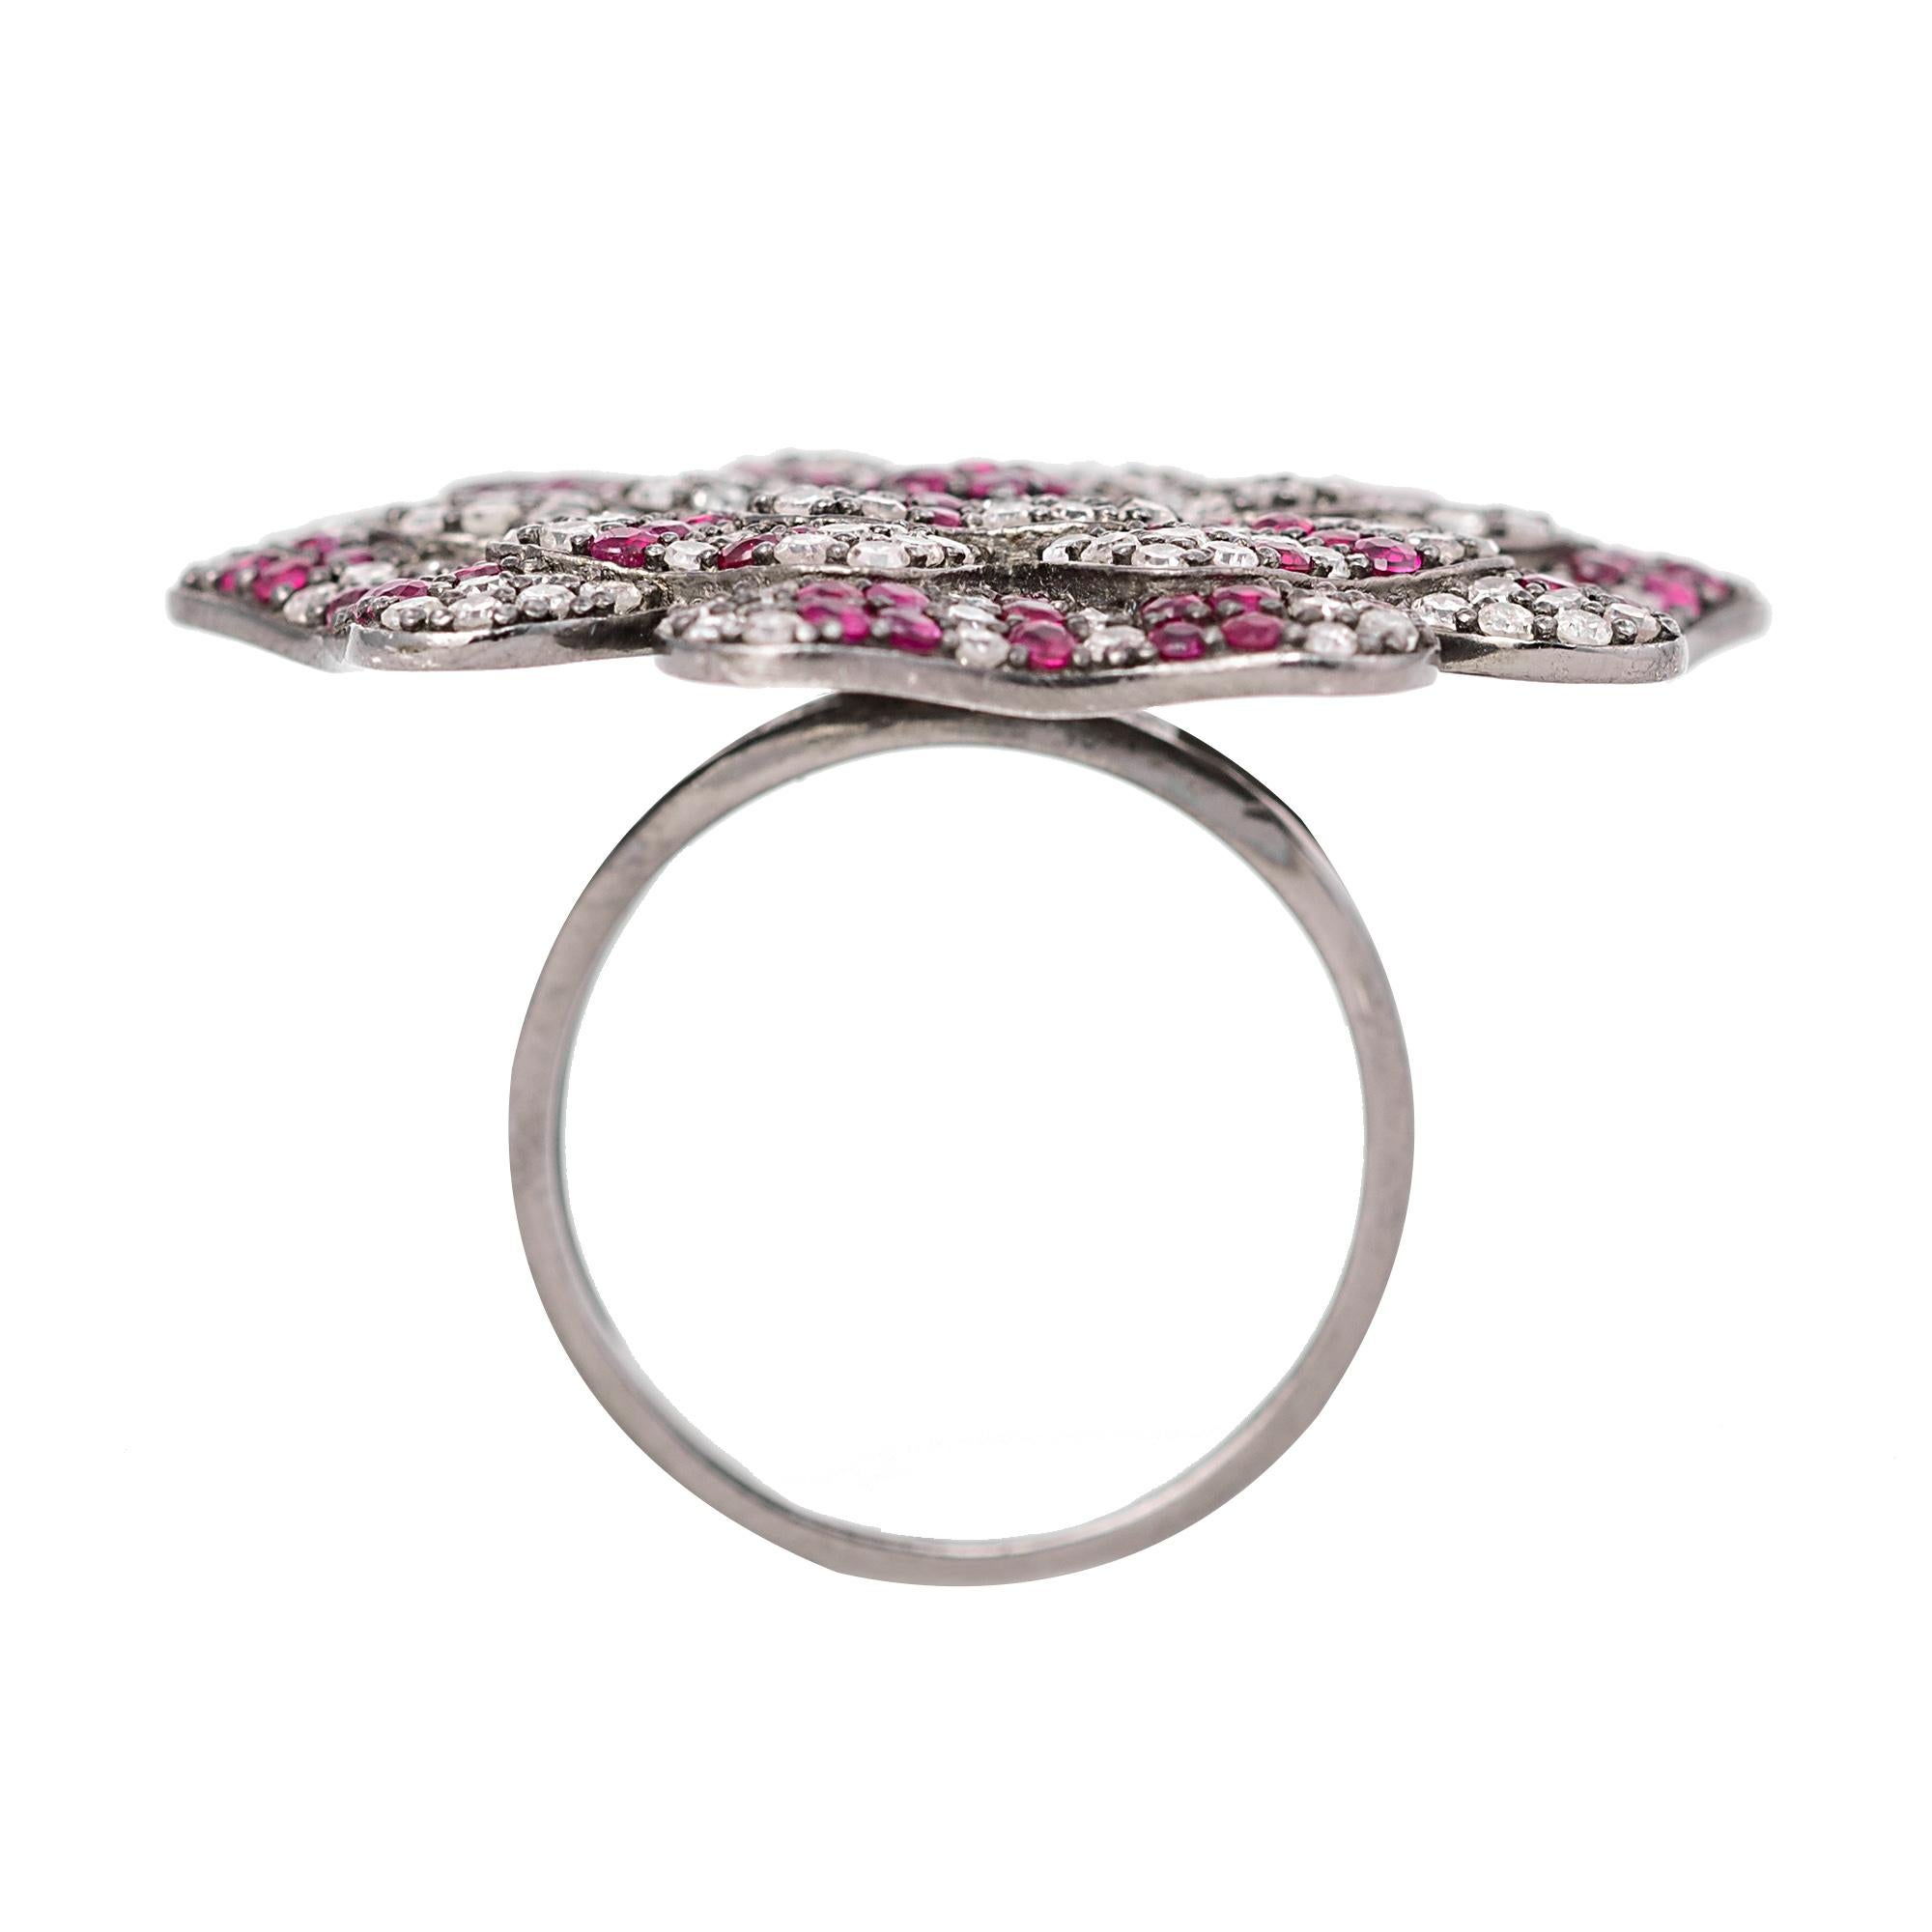 2.37 Carat Diamond and Ruby Flower Statement Fashion Ring in Victorian Style For Sale 1